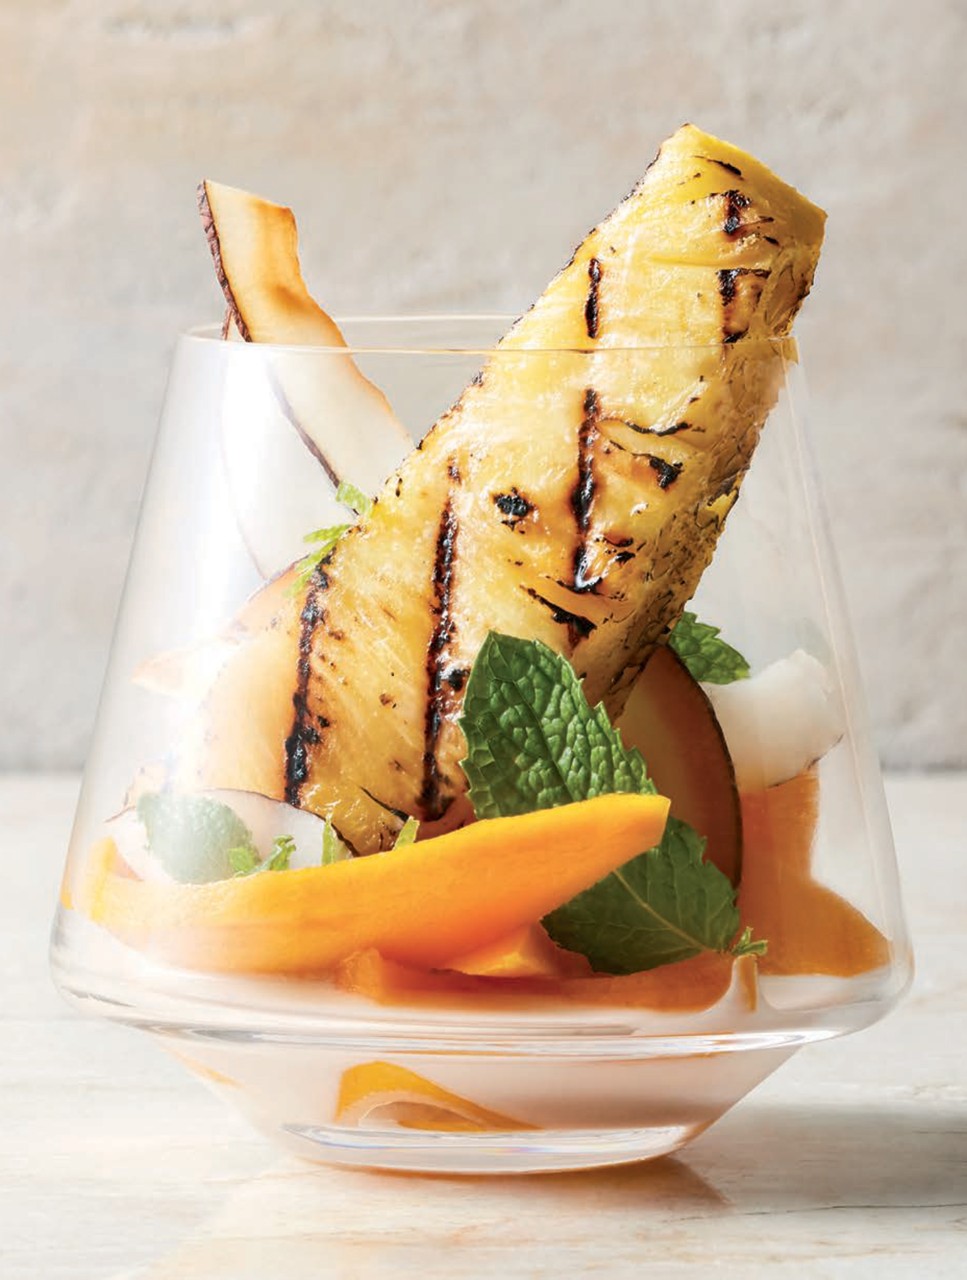 Mango and Grilled Pineapple Salad with Coconut-Lime Dressing